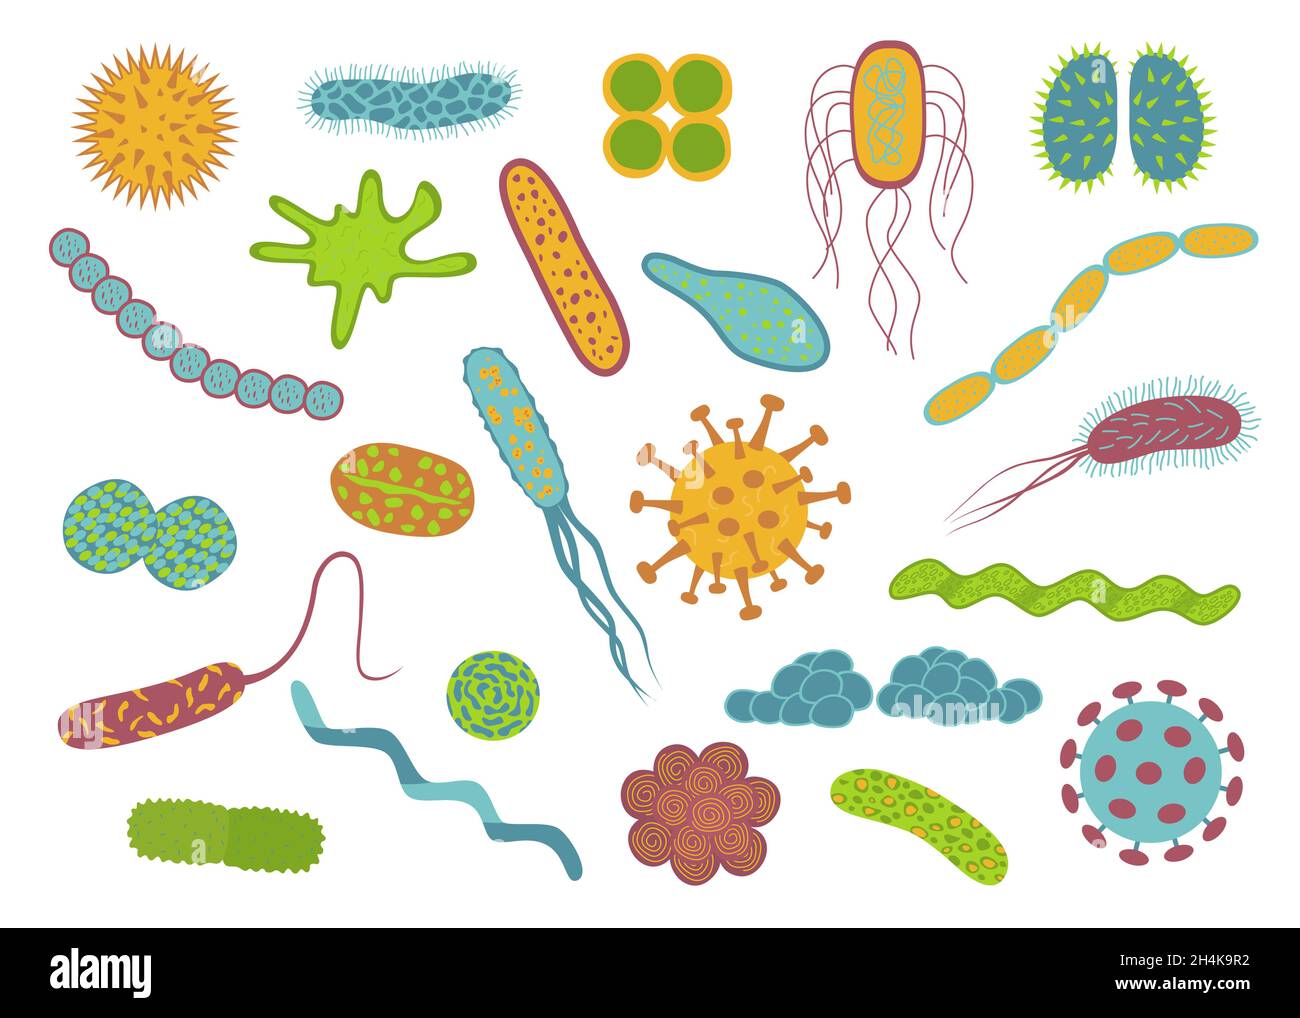 Flat design germs and bacteria icons set isolated on white background ...